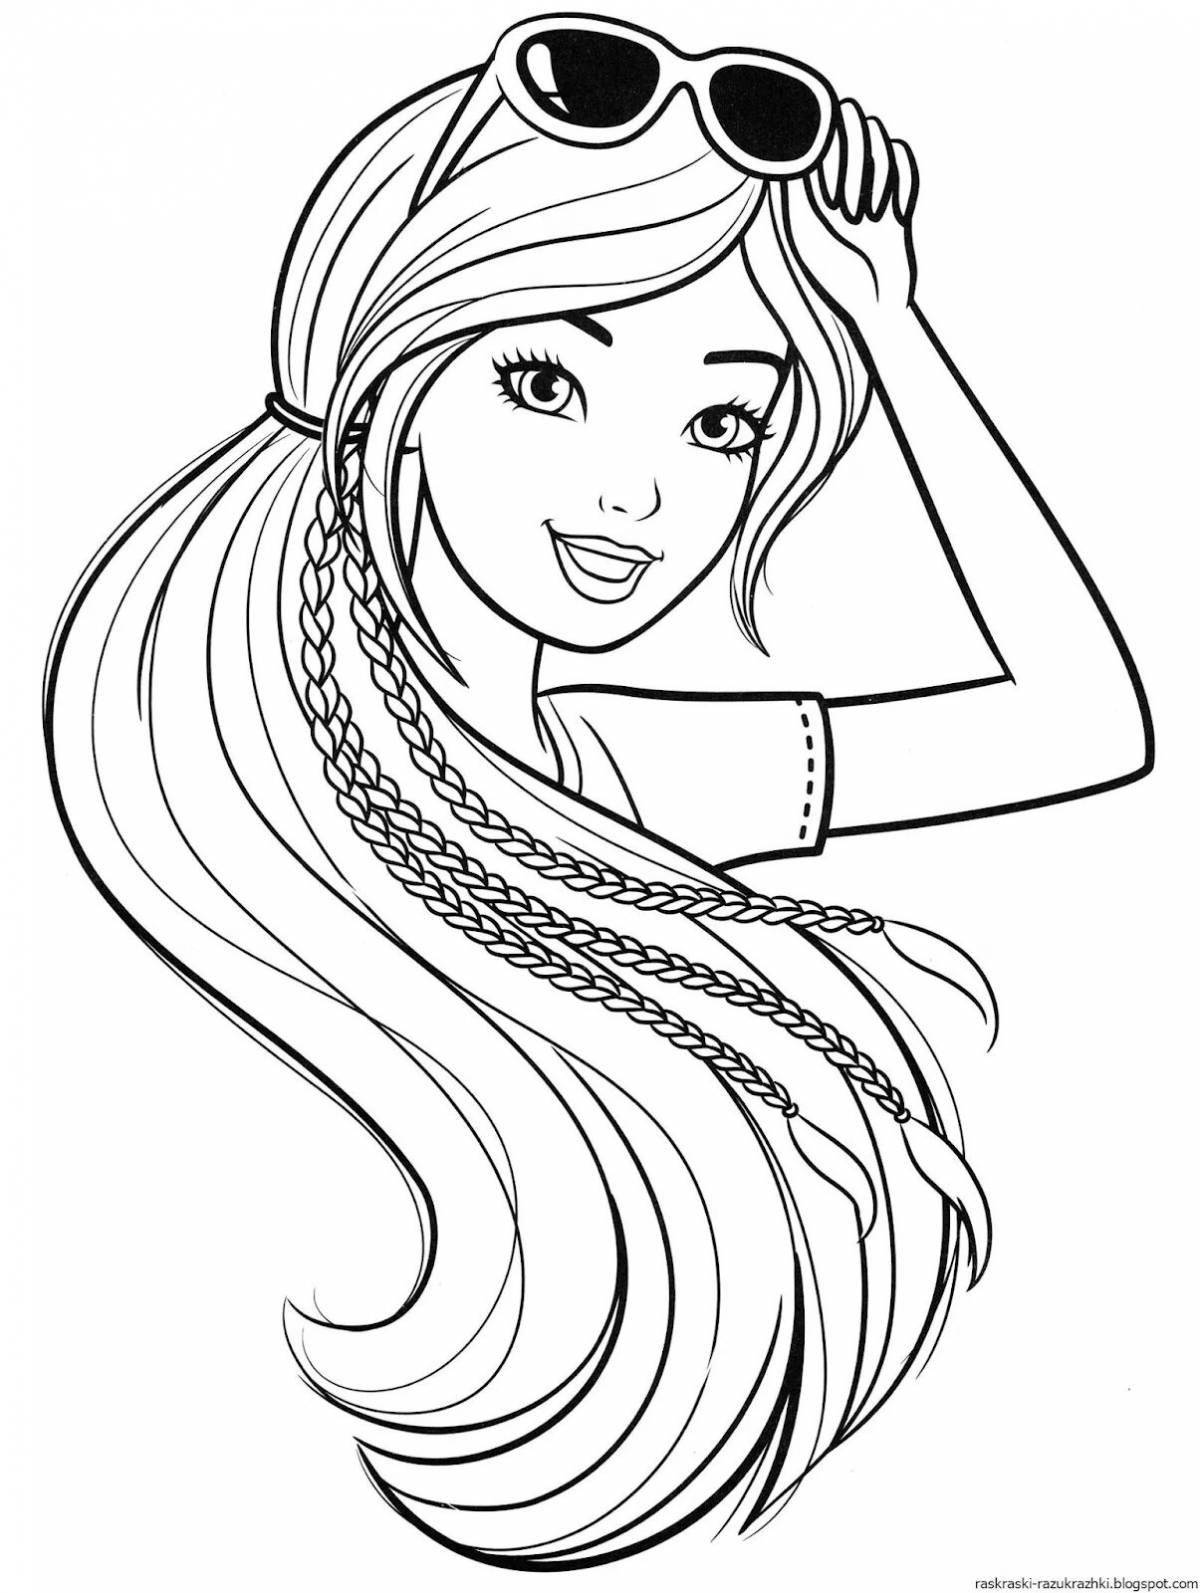 Generous coloring book for girls 8-10 years old